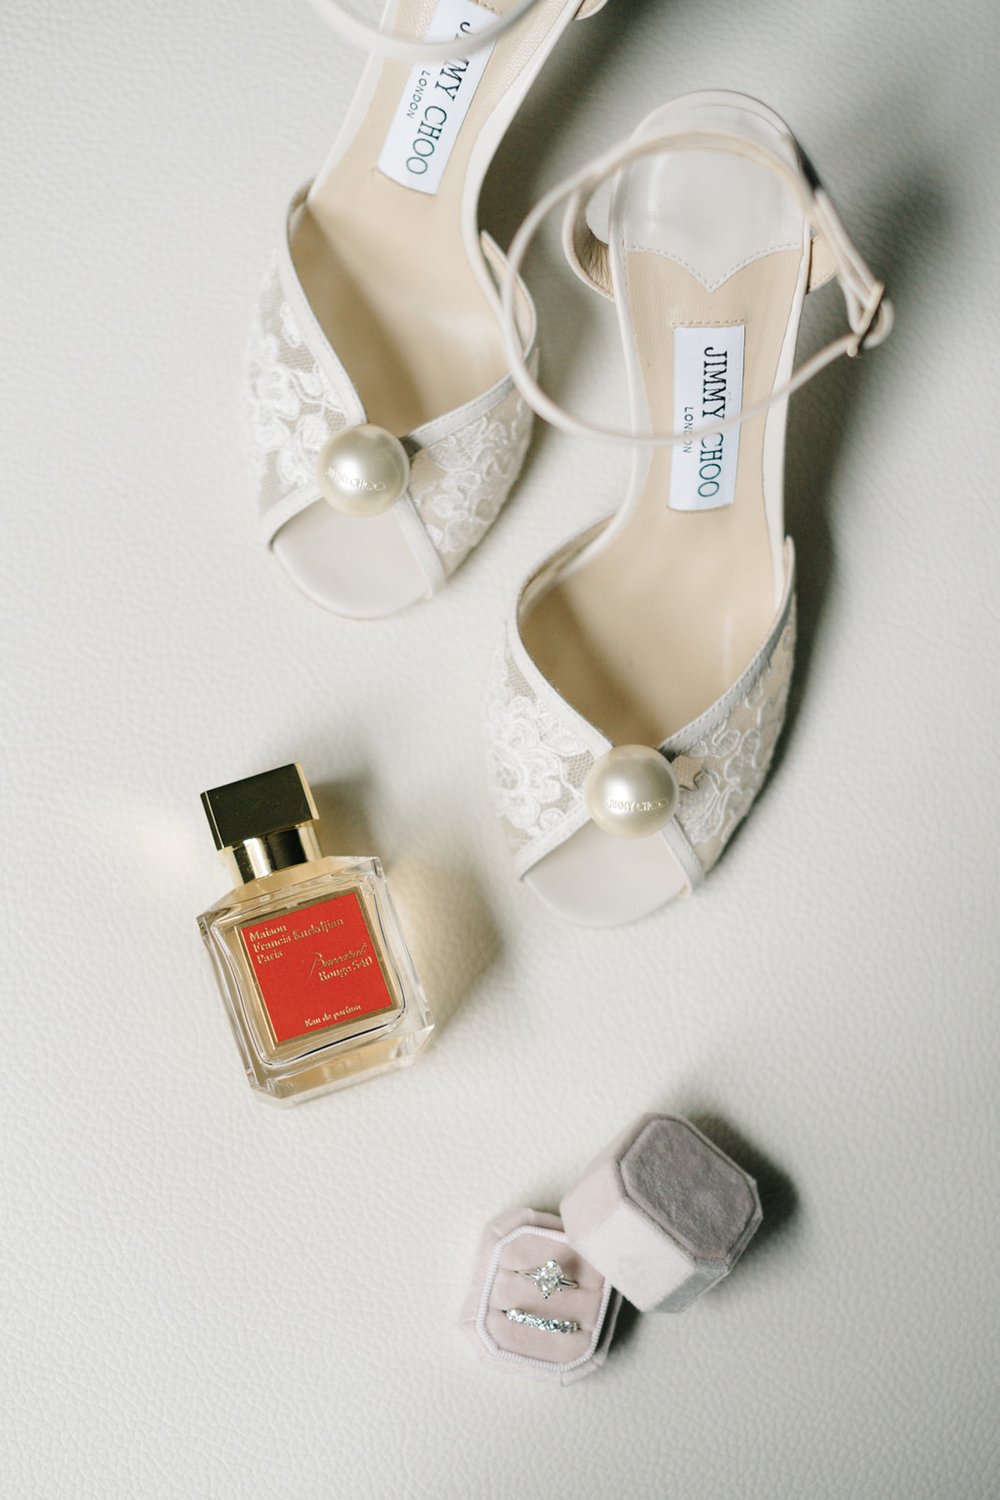 Jimmy Choo Pearl and Lace Shoes at Fairmont Olympic Wedding